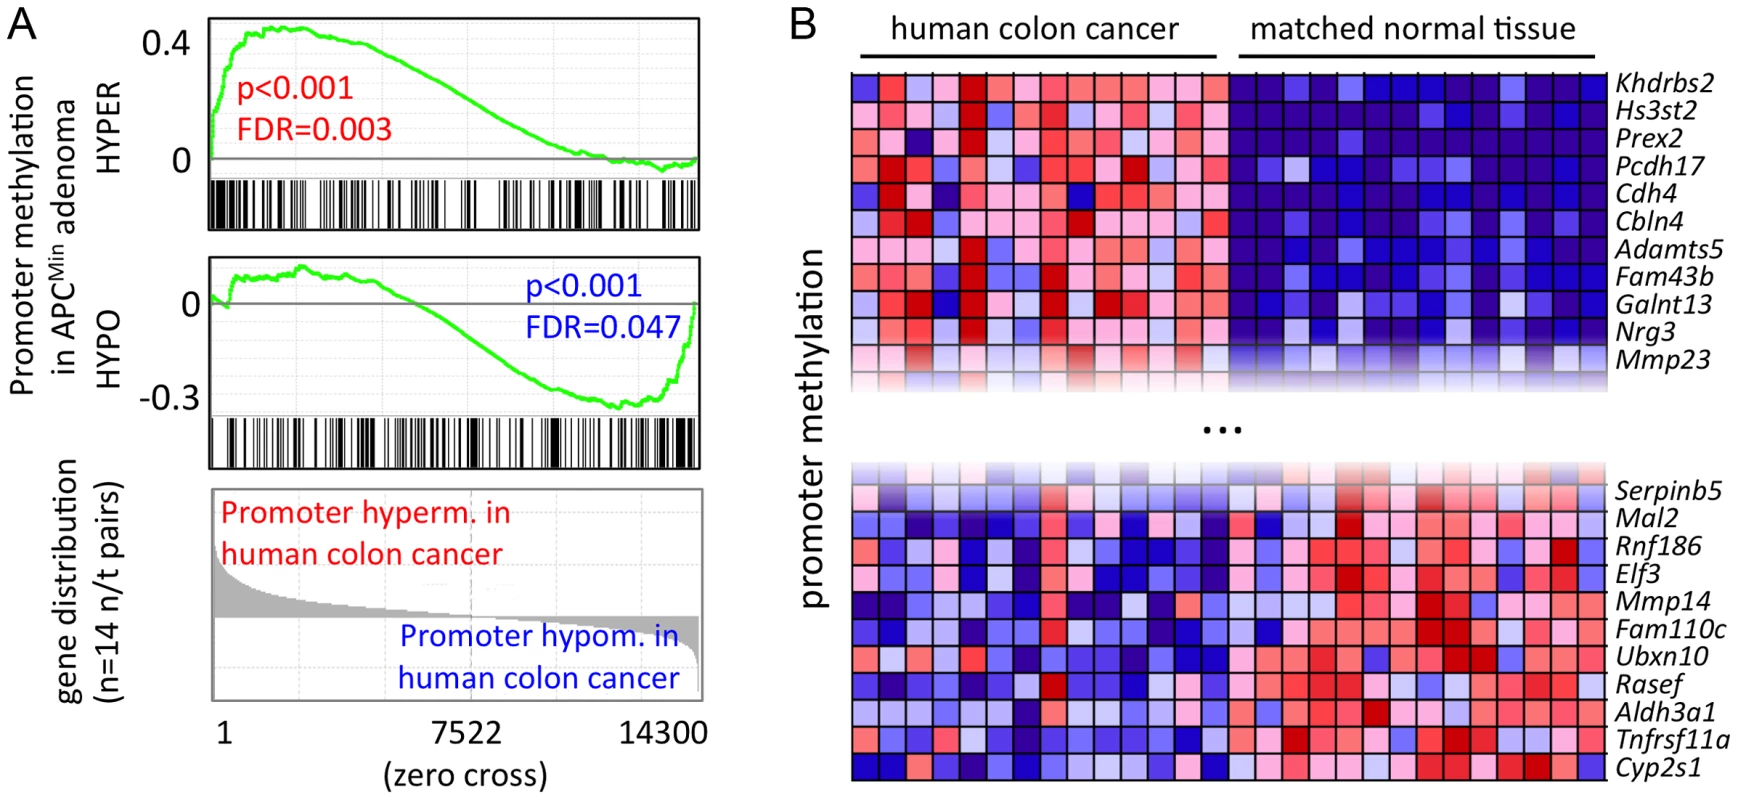 A core set of APC<sup>Min</sup> adenoma-specific CpG methylation patterns is conserved in human colon cancer.